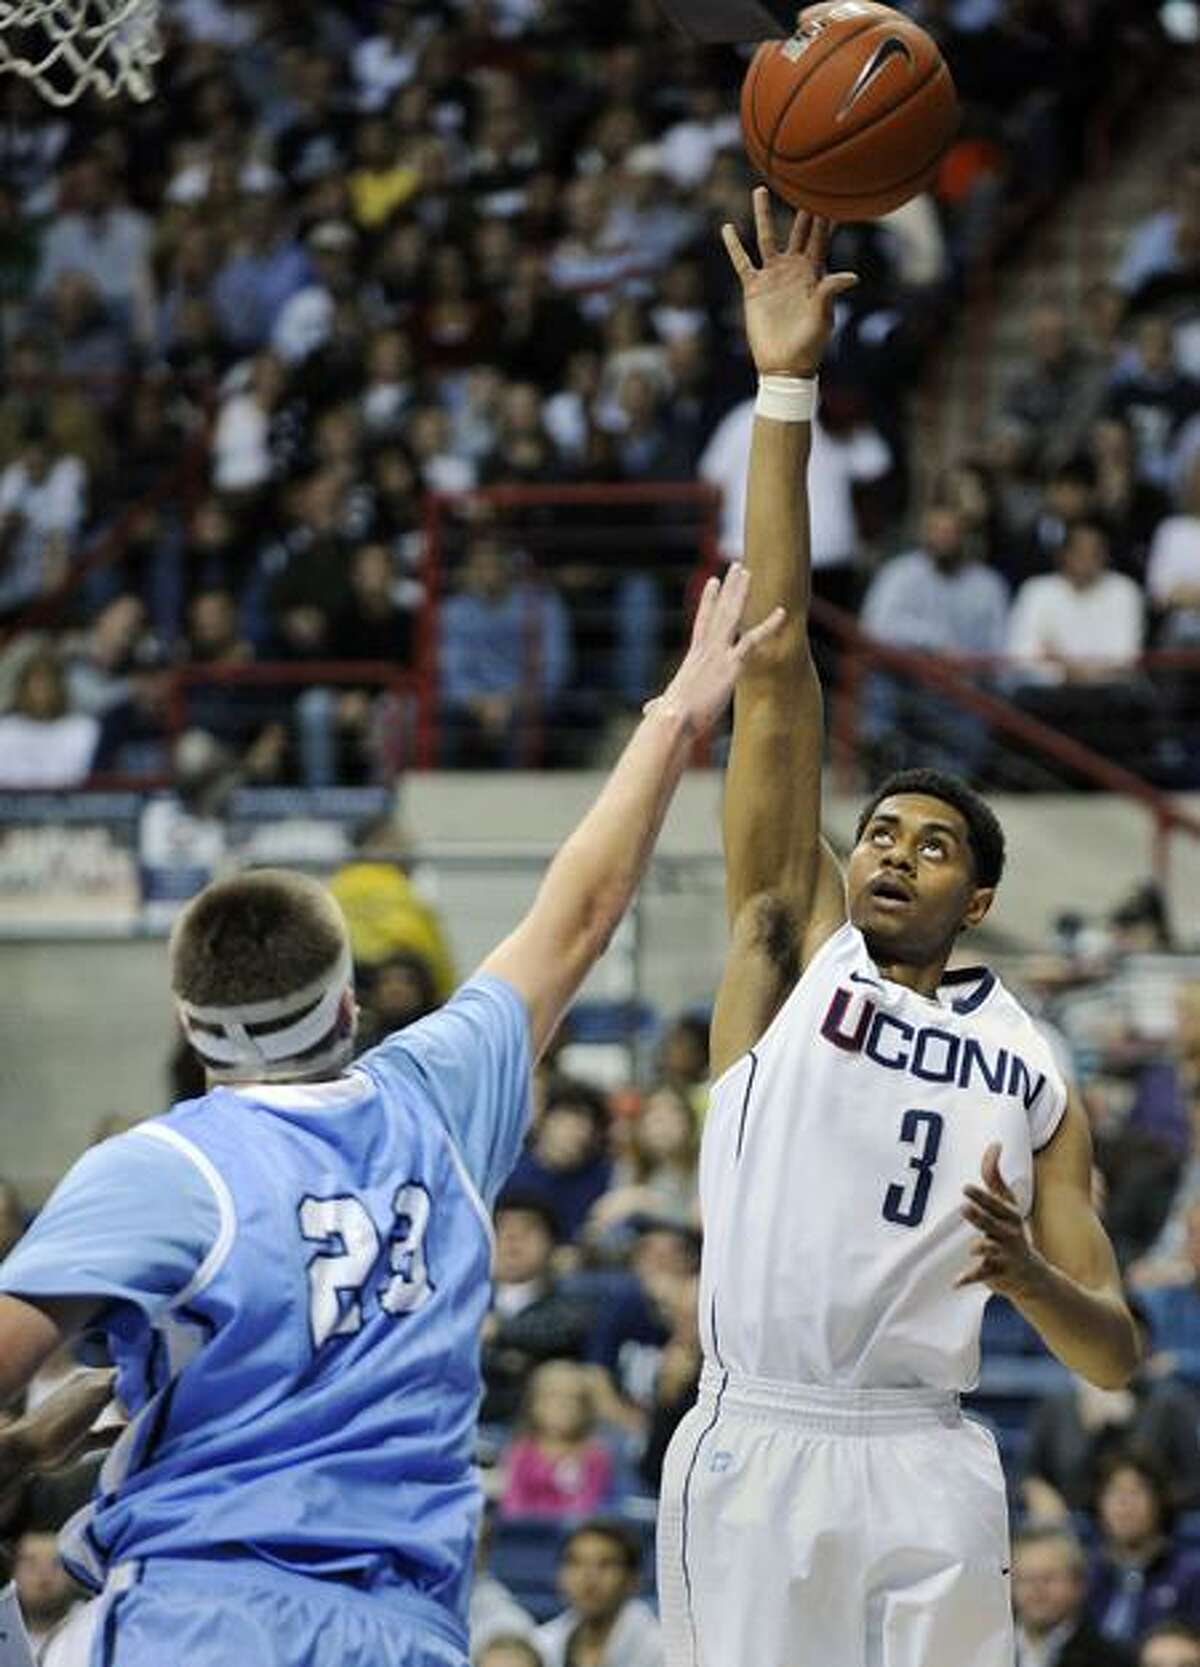 Connecticut's Jeremy Lamb, right, shoots over Columbia's Cory Osetkowski during the first half of their NCAA college basketball game, Friday, Nov. 11, 2011, in Storrs, Conn. (AP Photo/Fred Beckham)